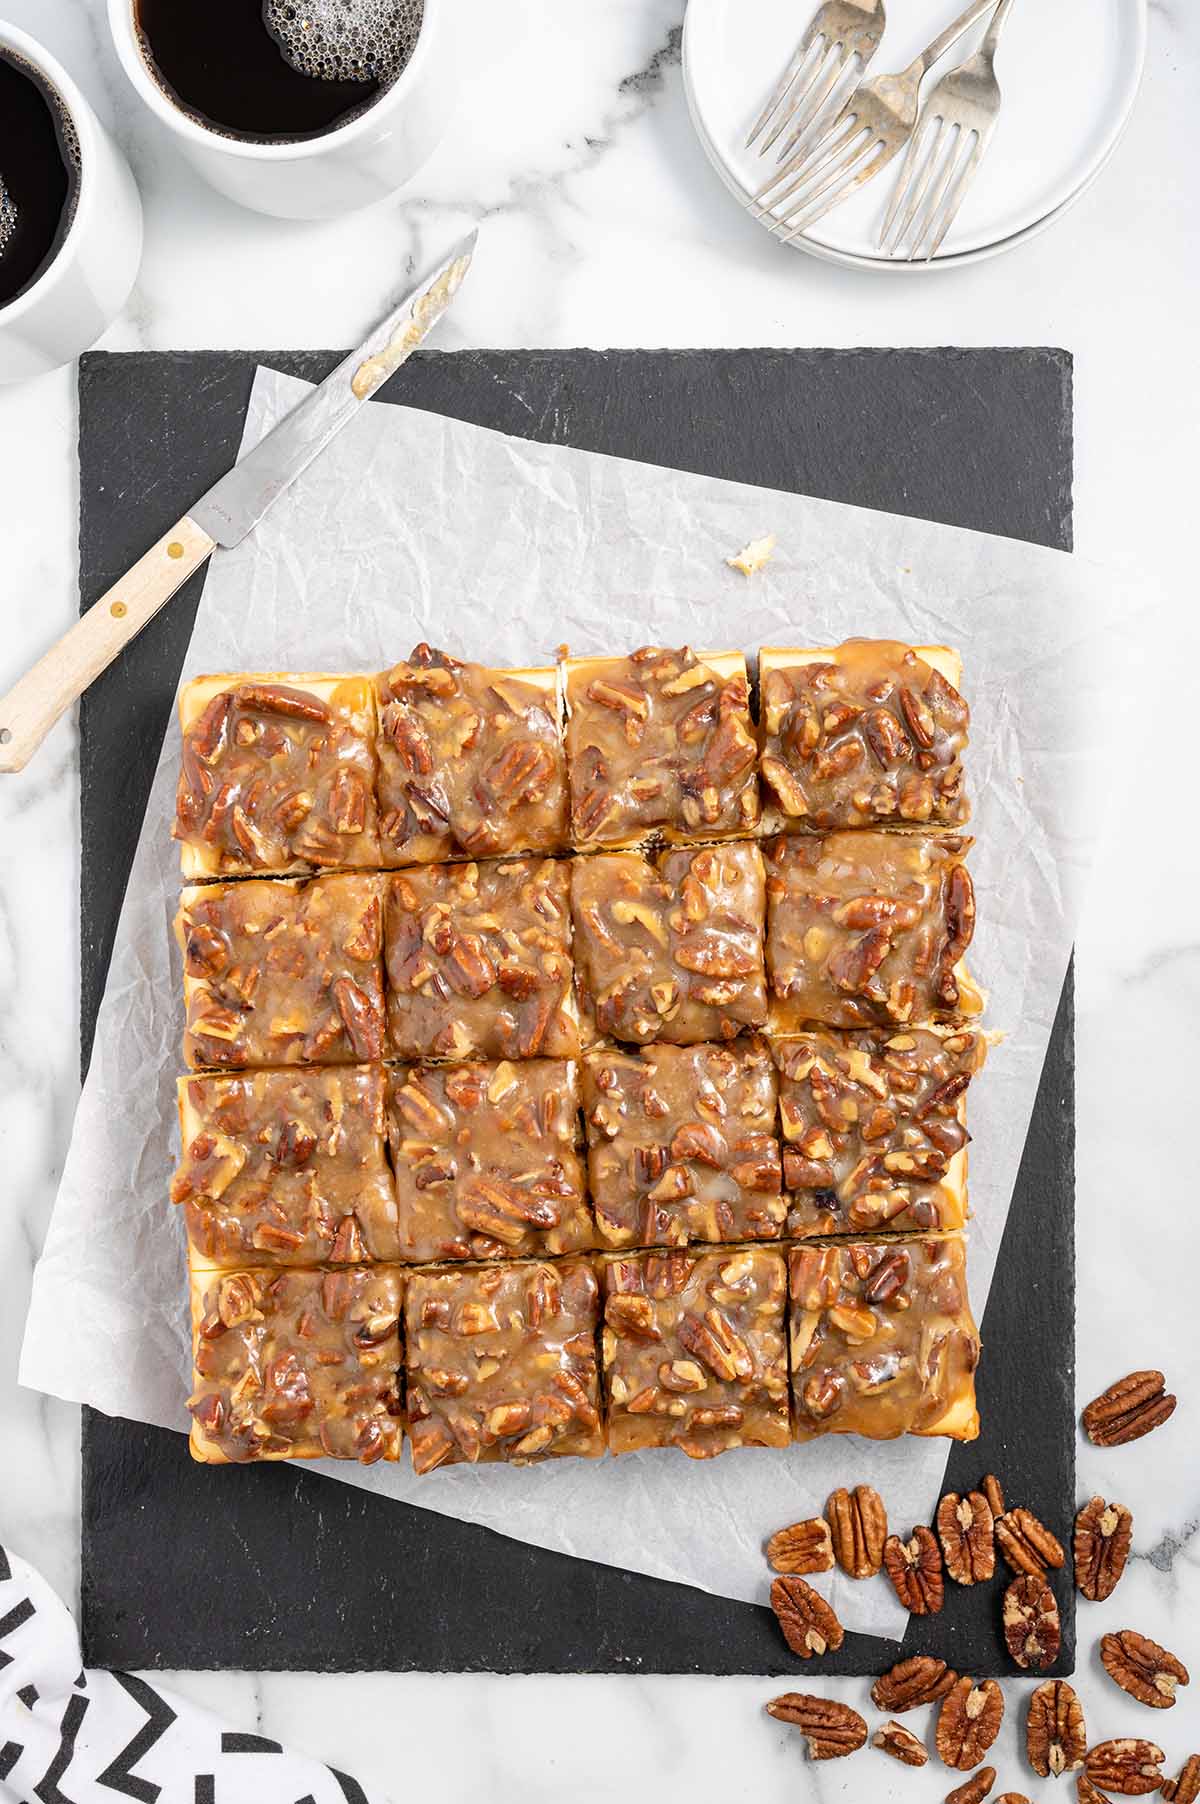 Pecan Pie Cheesecake Bars cut into squares over parchment paper with two cups of coffee on the background.